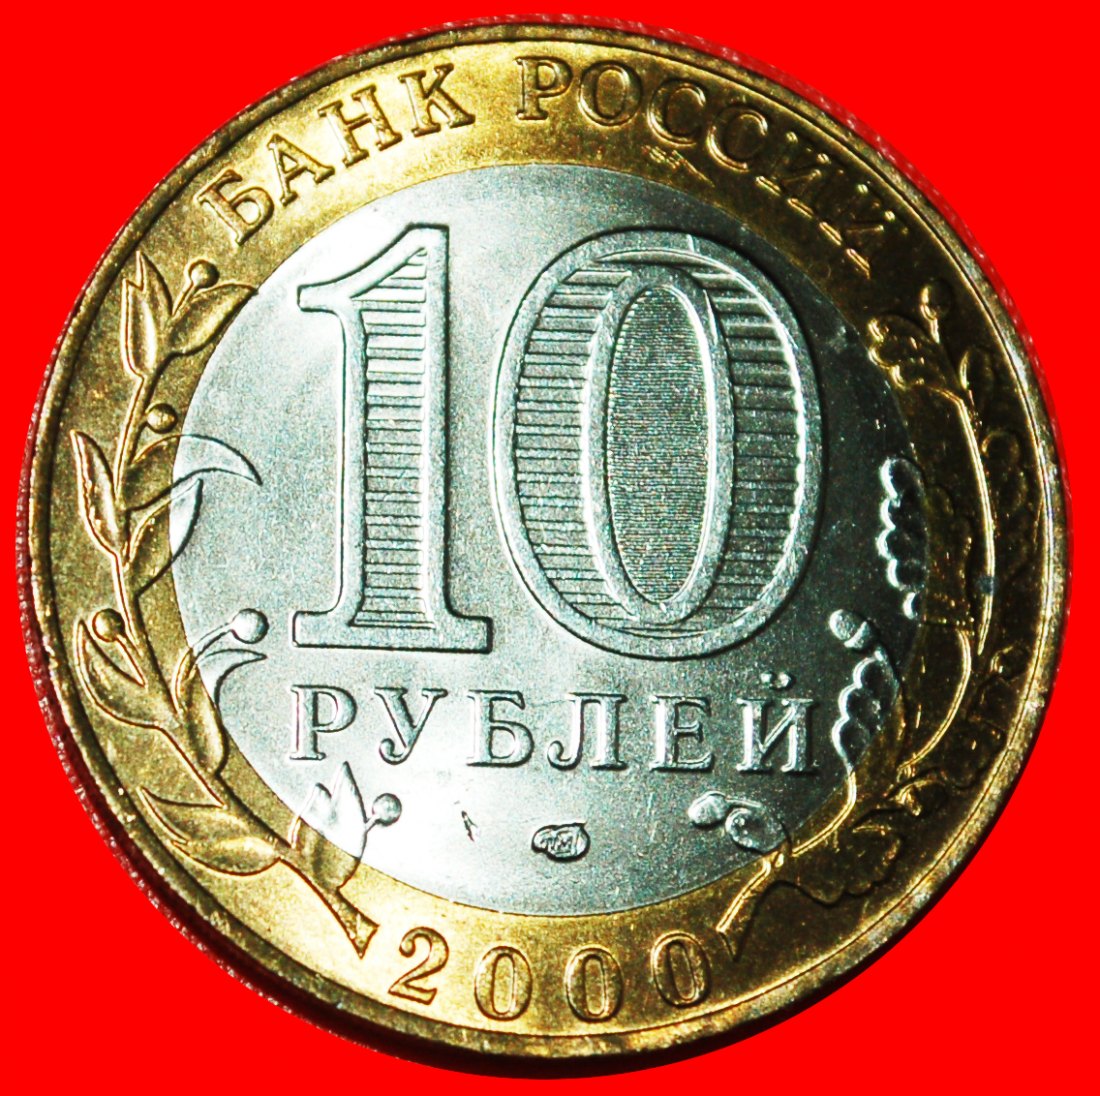  * VICTORY OVER GERMANY 1941-1945: russia (ex. the USSR)★ 10 ROUBLES 2000 UNC★LOW START ★ NO RESERVE!   